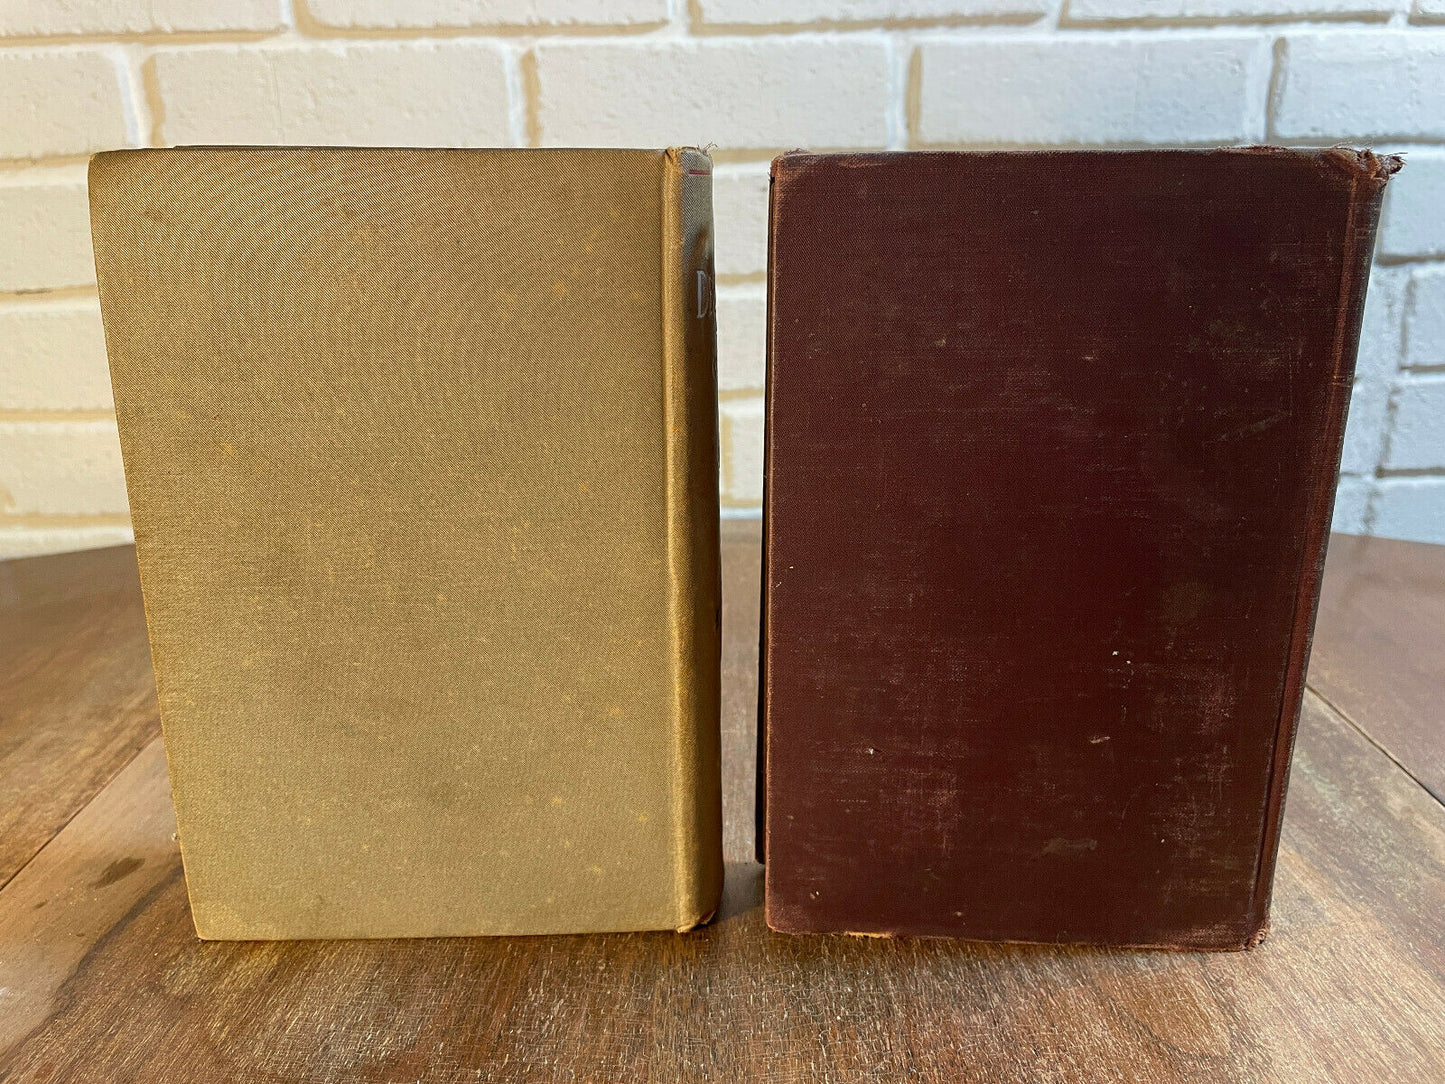 James Fenimore Cooper, The Spy & The Deerslayer Antique 2 book lot, no date (J5)